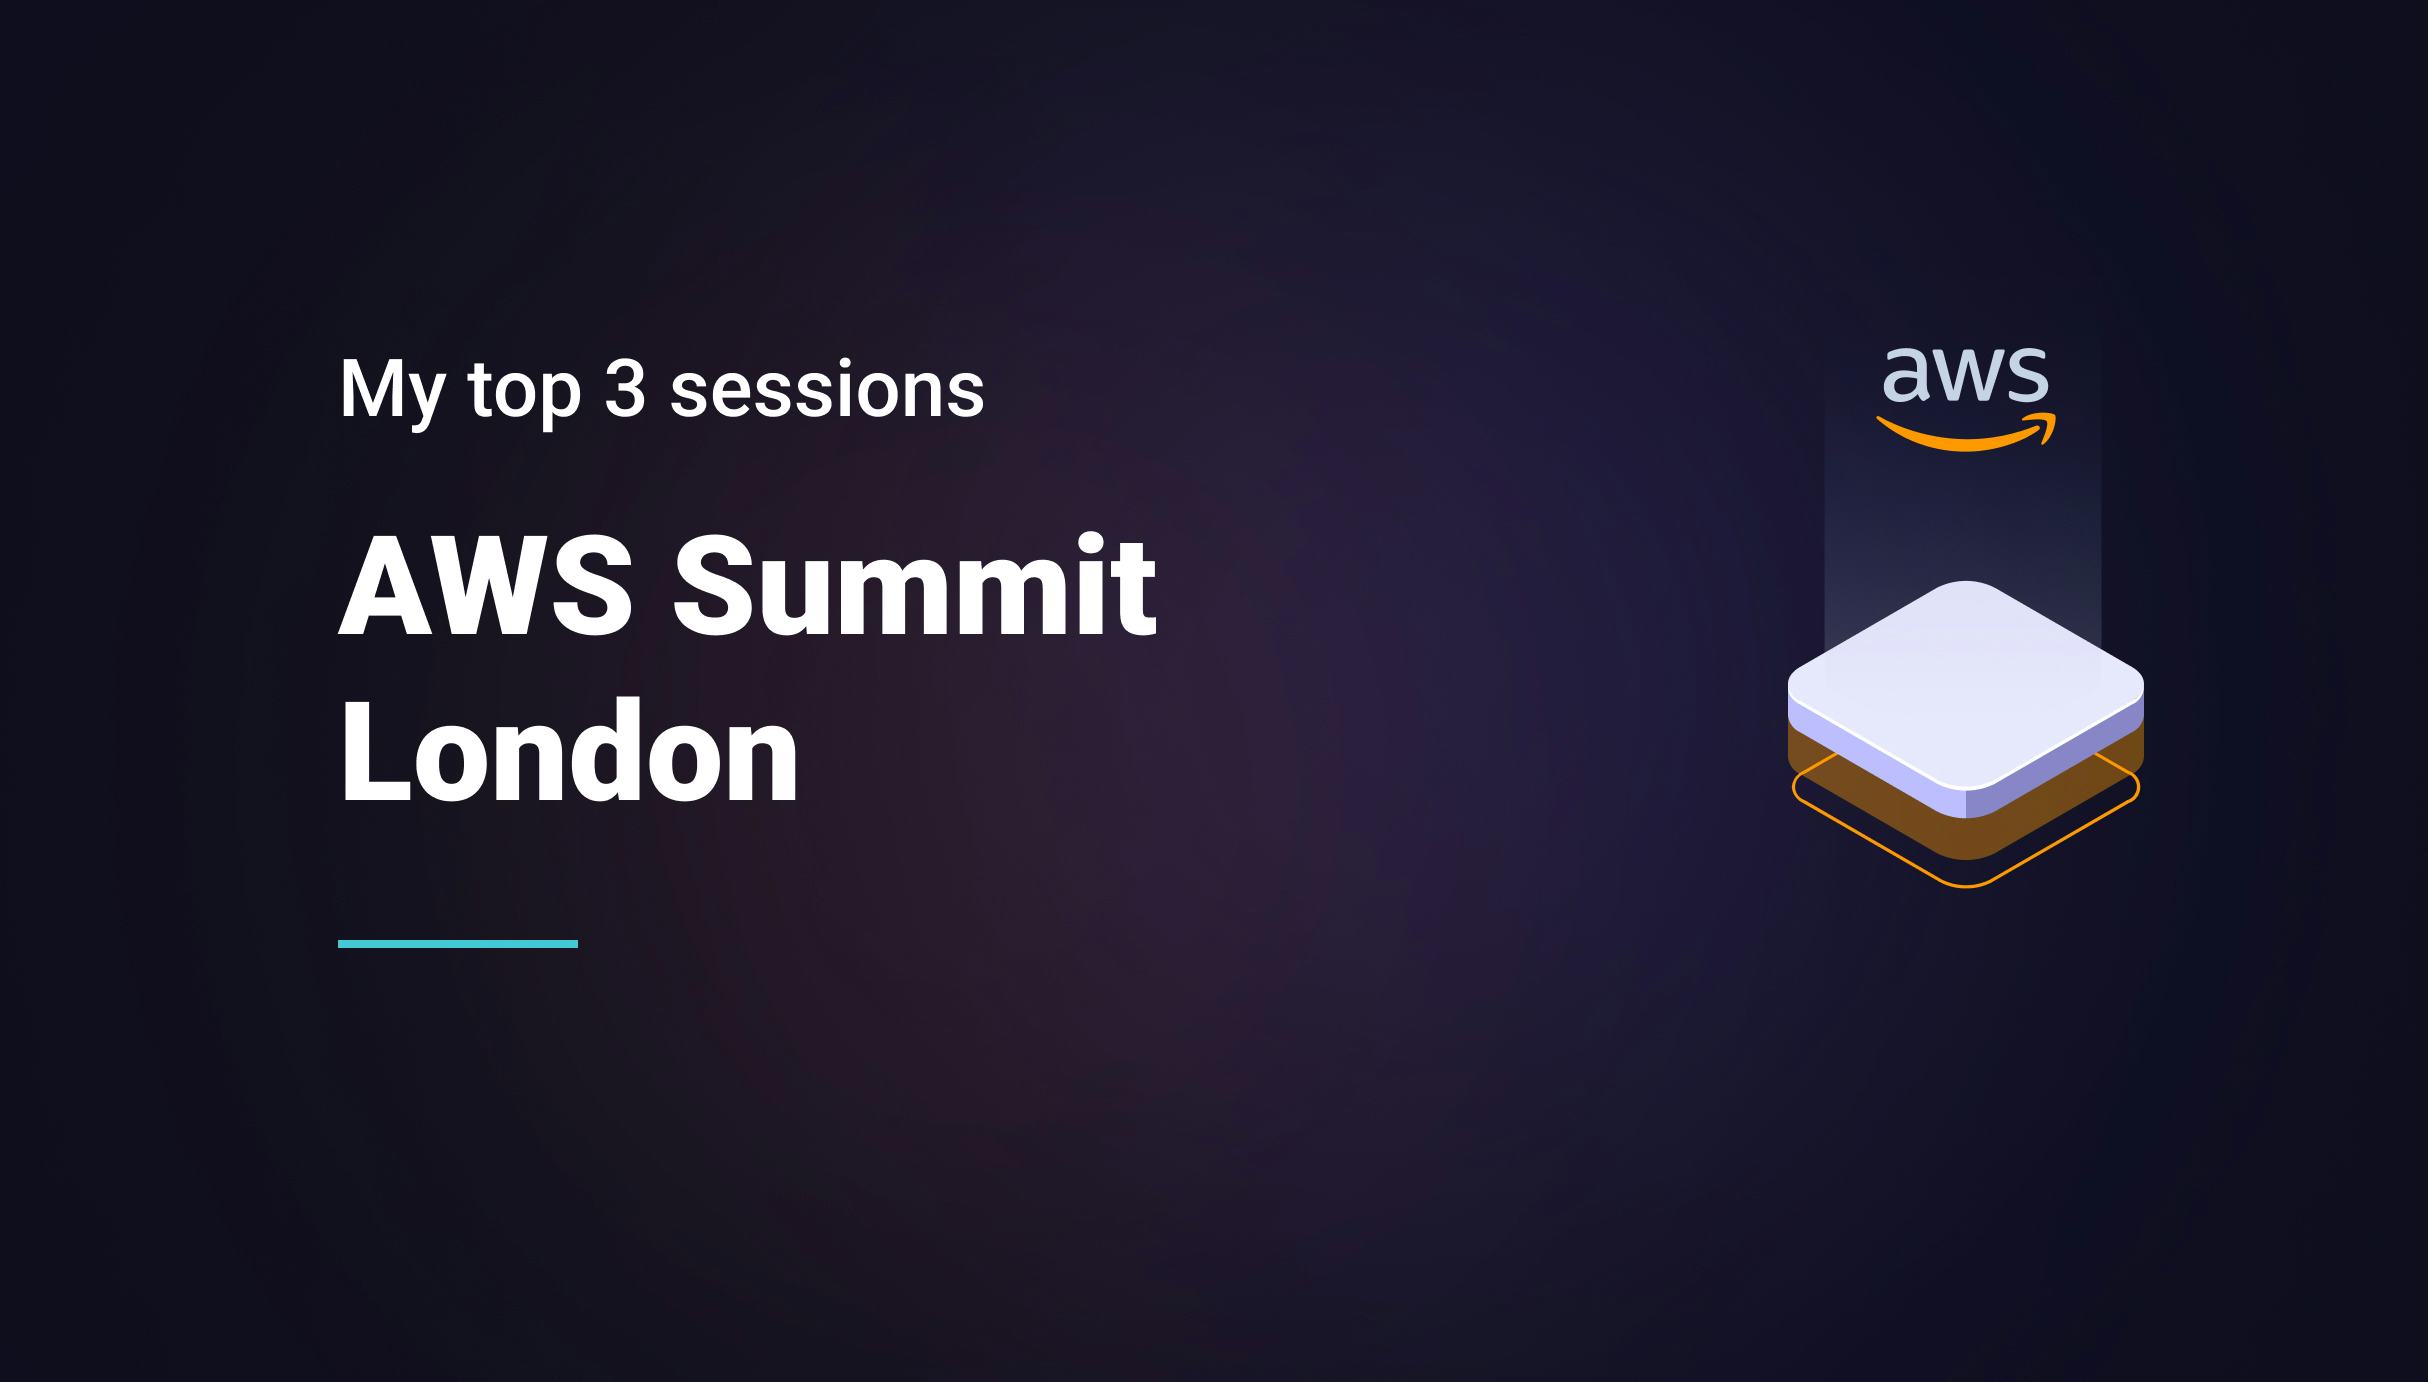 AWS Summit London - My top 3 sessions - Qovery